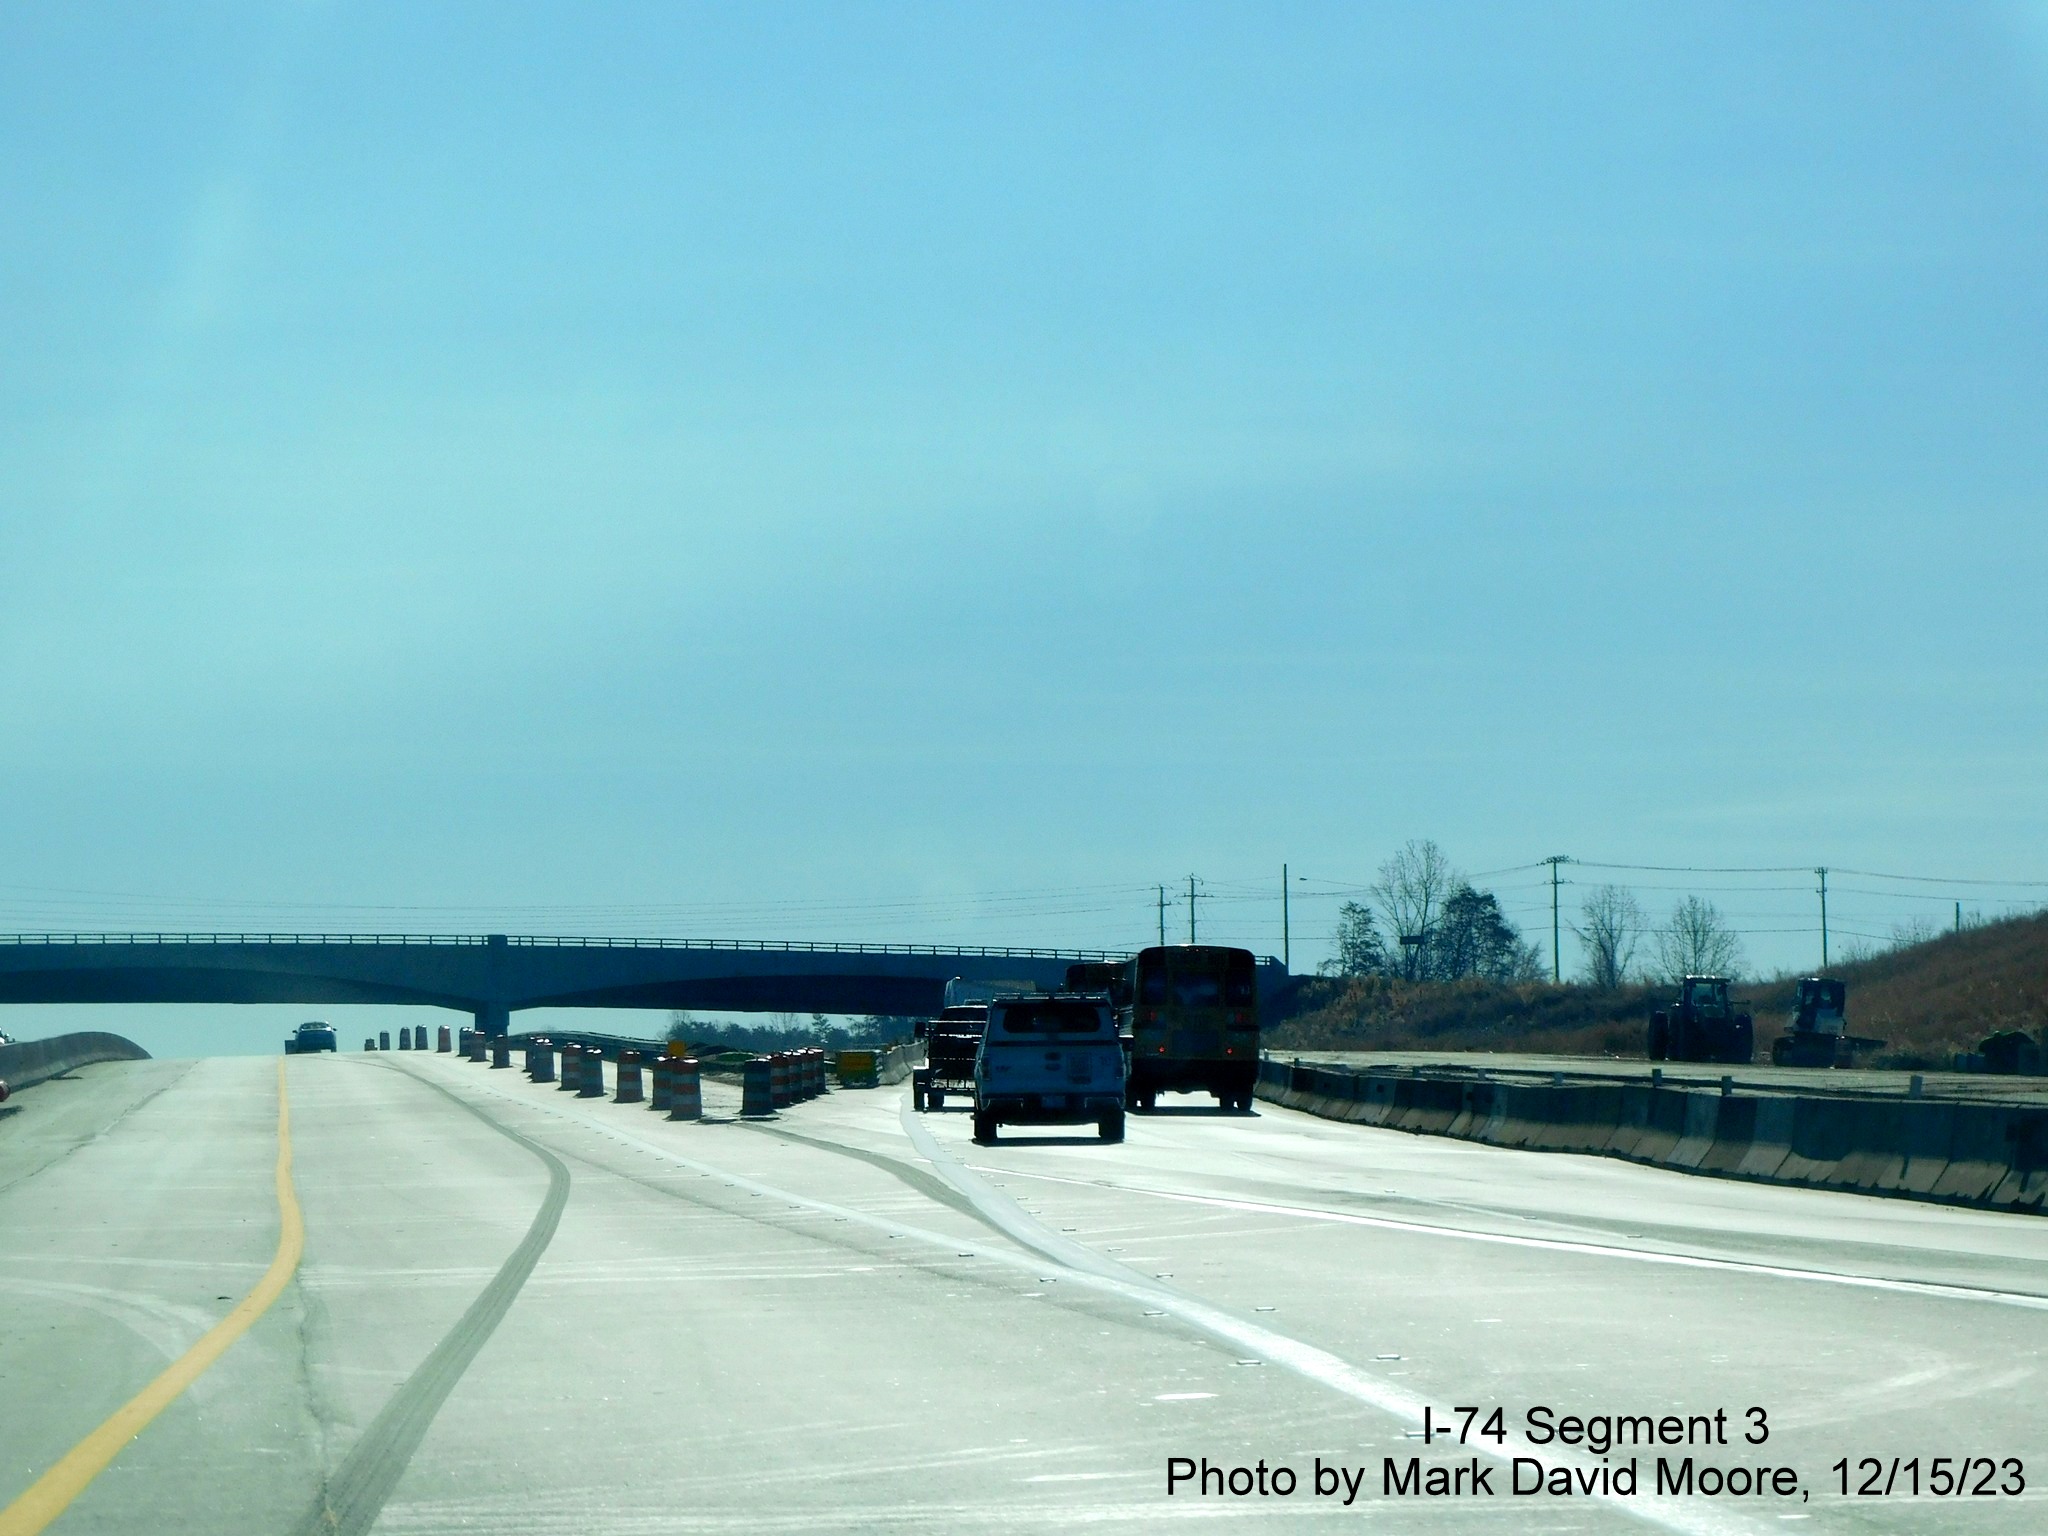 Image of temporary split between US 52 South lanes and NC 74 East Winston-Salem Northern Beltway 
        lanes prior to the NC 65 exit, by Mark David Moore, December 2023